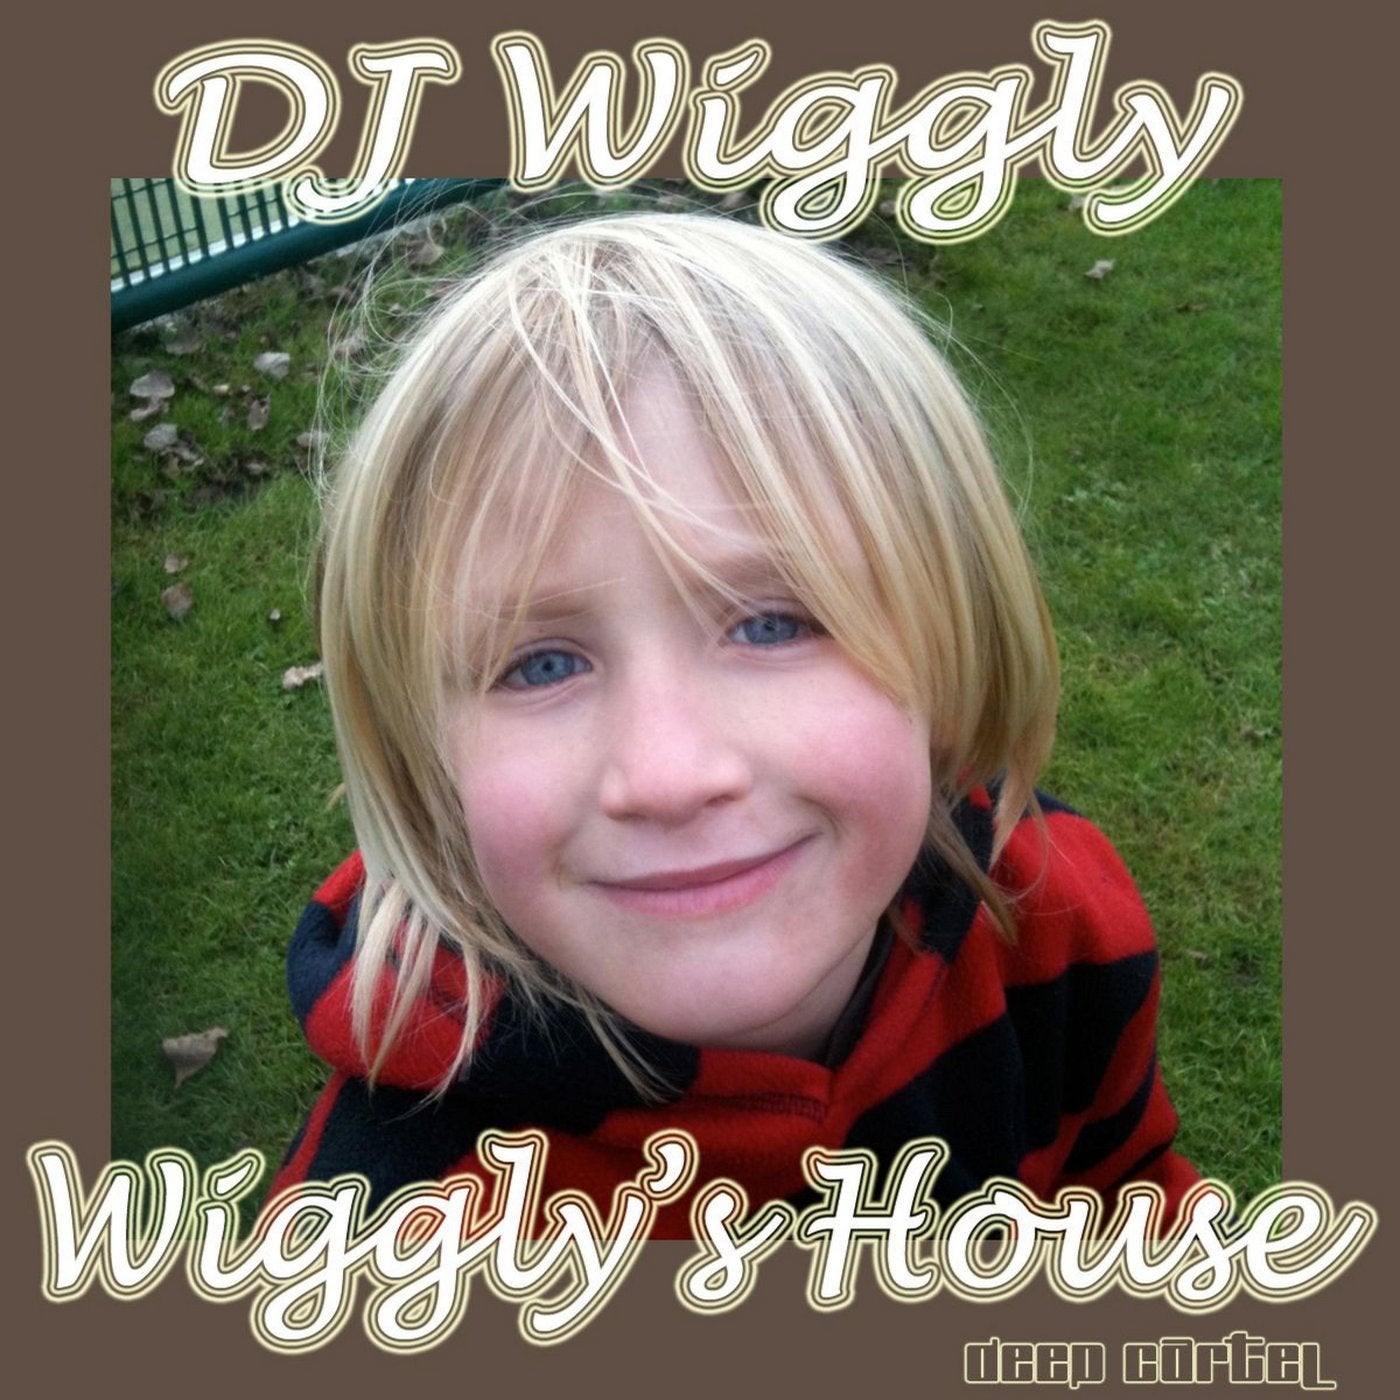 Wiggly's House